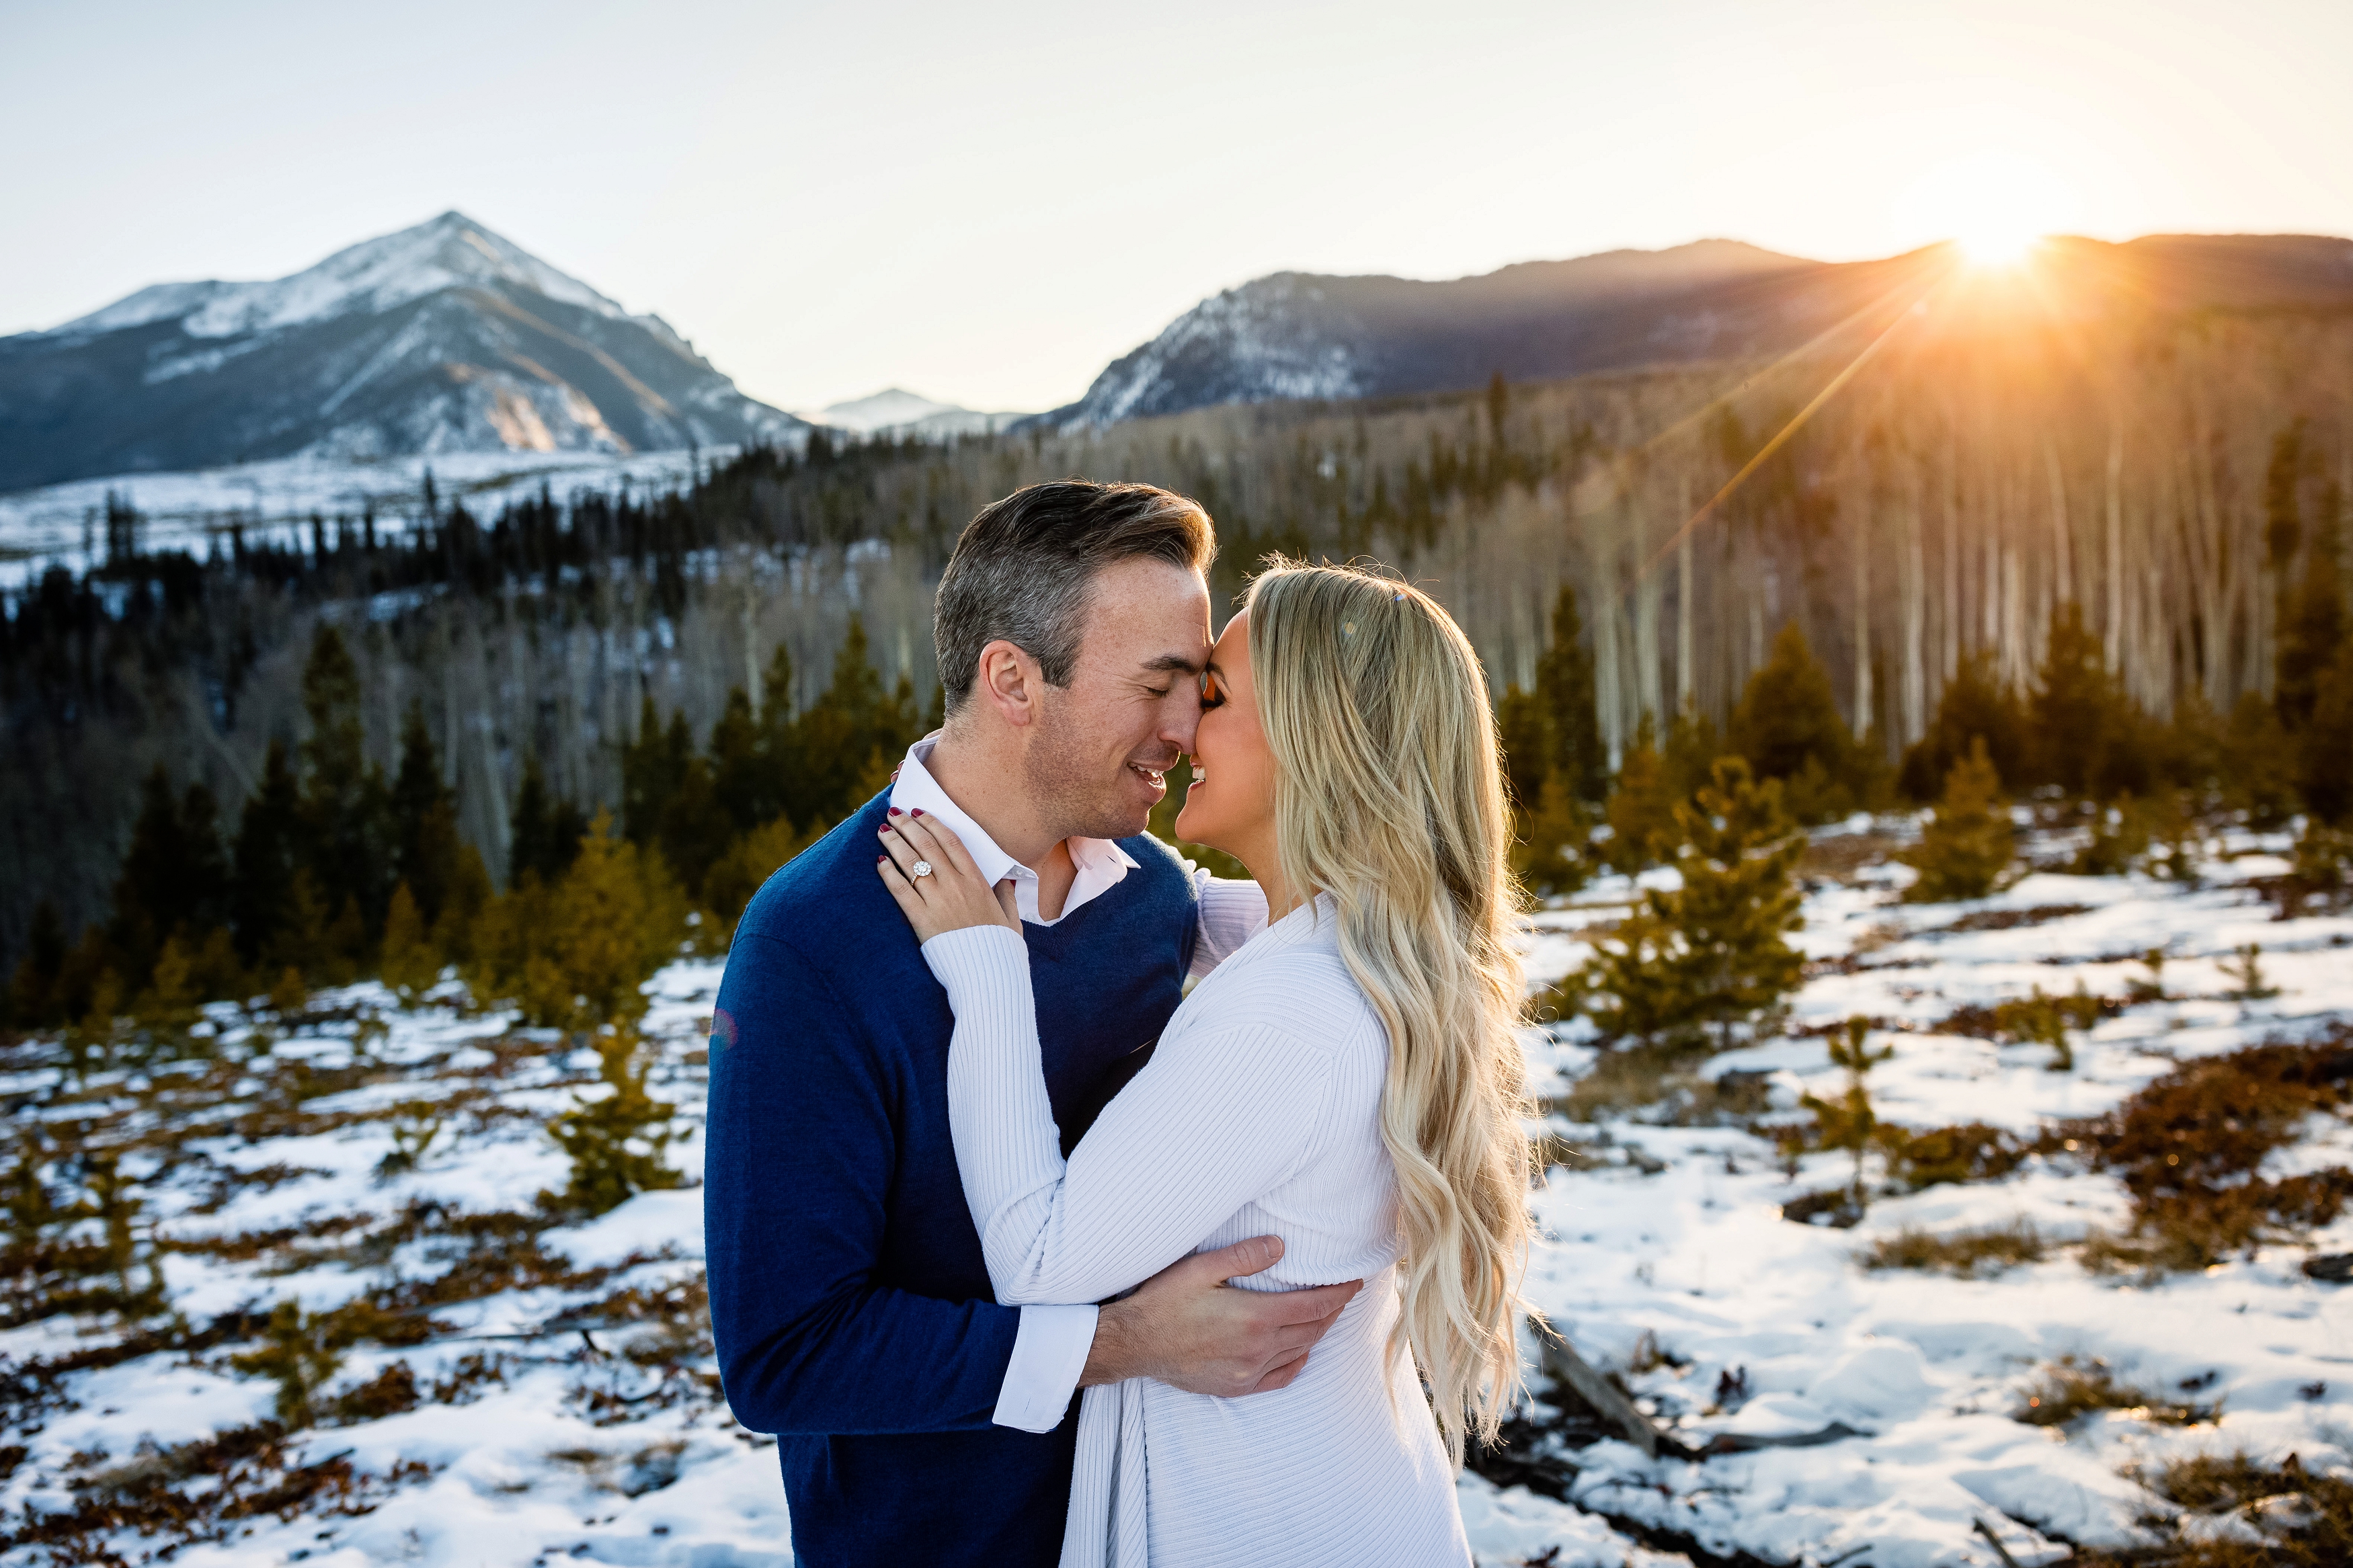 The last bits of sunlight during these two's Winter Silverthorne Engagement.